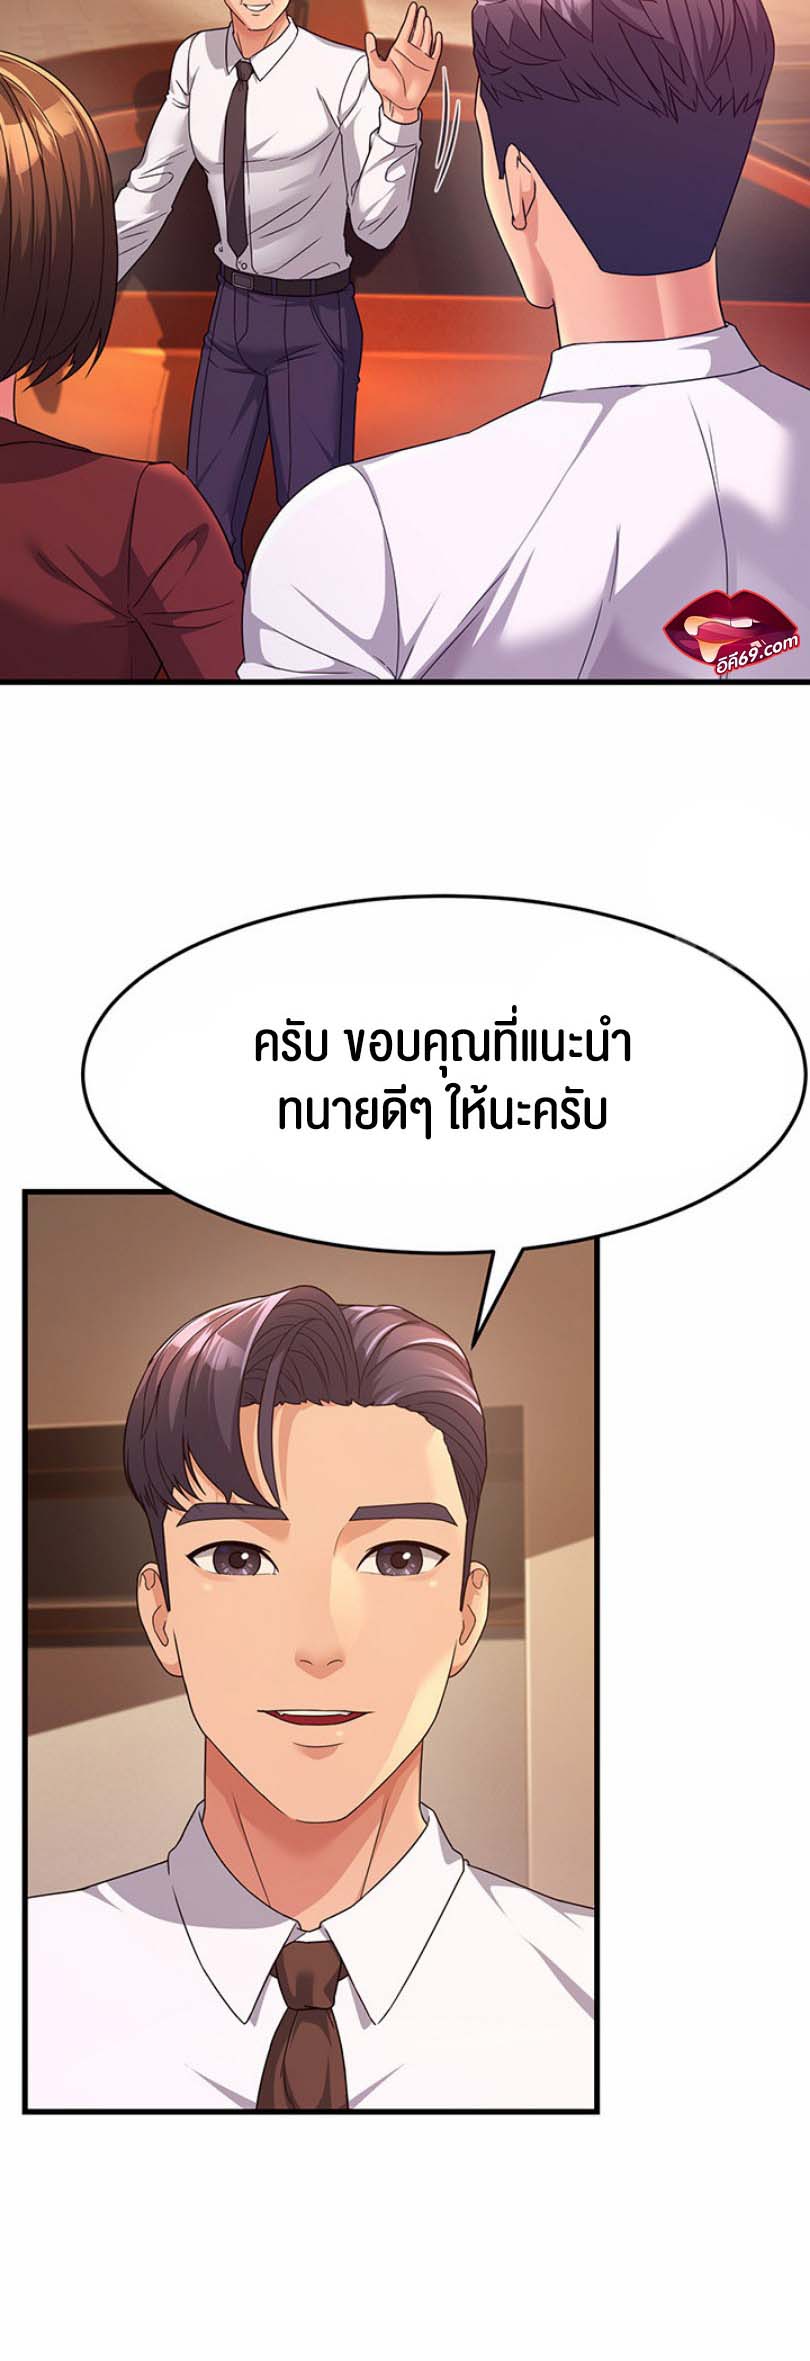 à¸­à¹ˆà¸²à¸™à¹‚à¸”à¸ˆà¸´à¸™ à¹€à¸£à¸·à¹ˆà¸­à¸‡ Mother in Law Bends To My Will 9 03